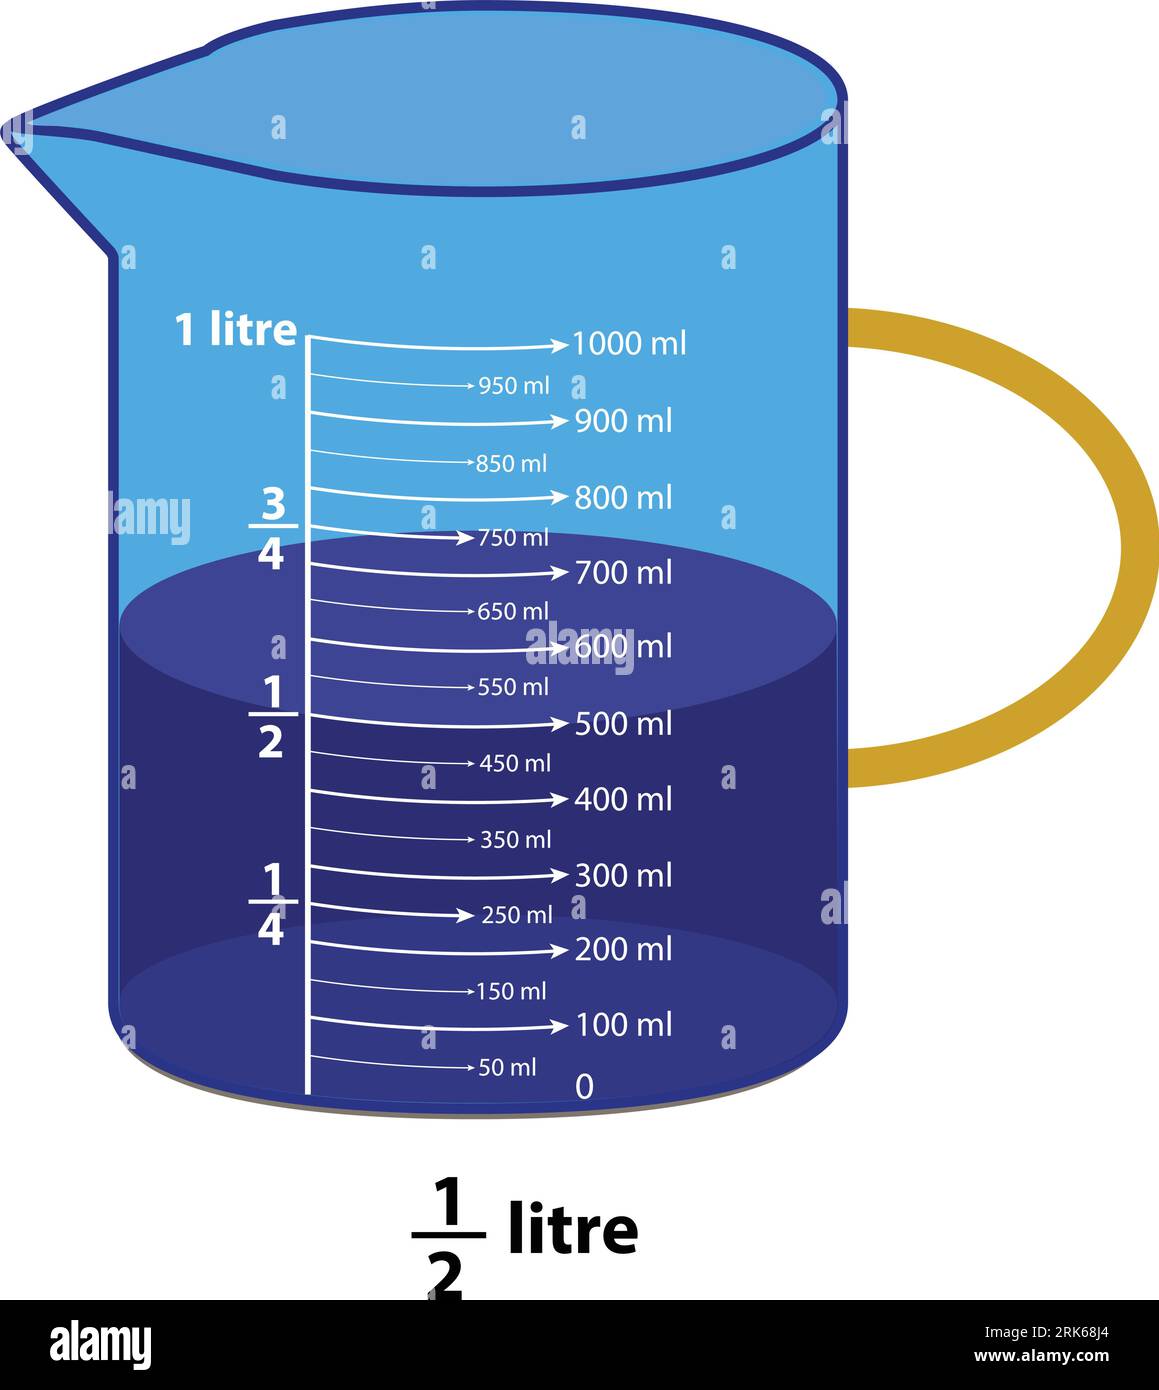 https://c8.alamy.com/comp/2RK68J4/the-scale-measuring-jug-500ml-with-measuring-scale-beaker-for-chemical-experiments-in-the-laboratory-vector-illustration-2RK68J4.jpg